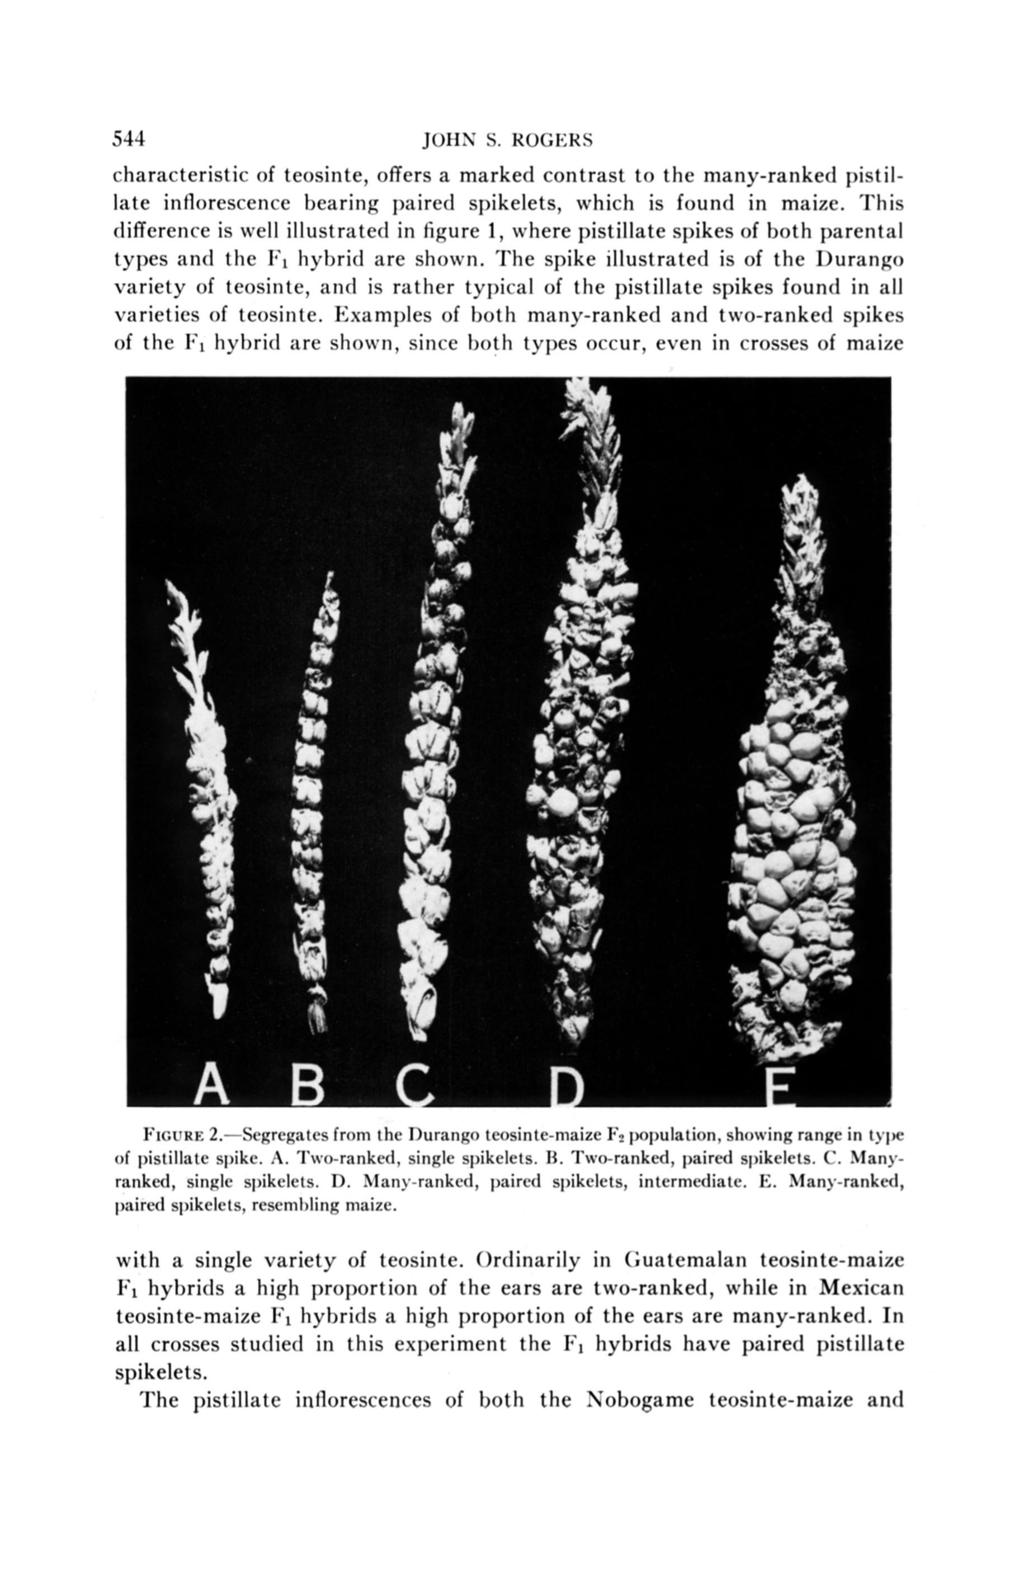 544 JOHS S. ROGERS characteristic of teosinte, offers a marked contrast to the many-ranked pistillate inflorescence bearing paired spikelets, which is found in maize.